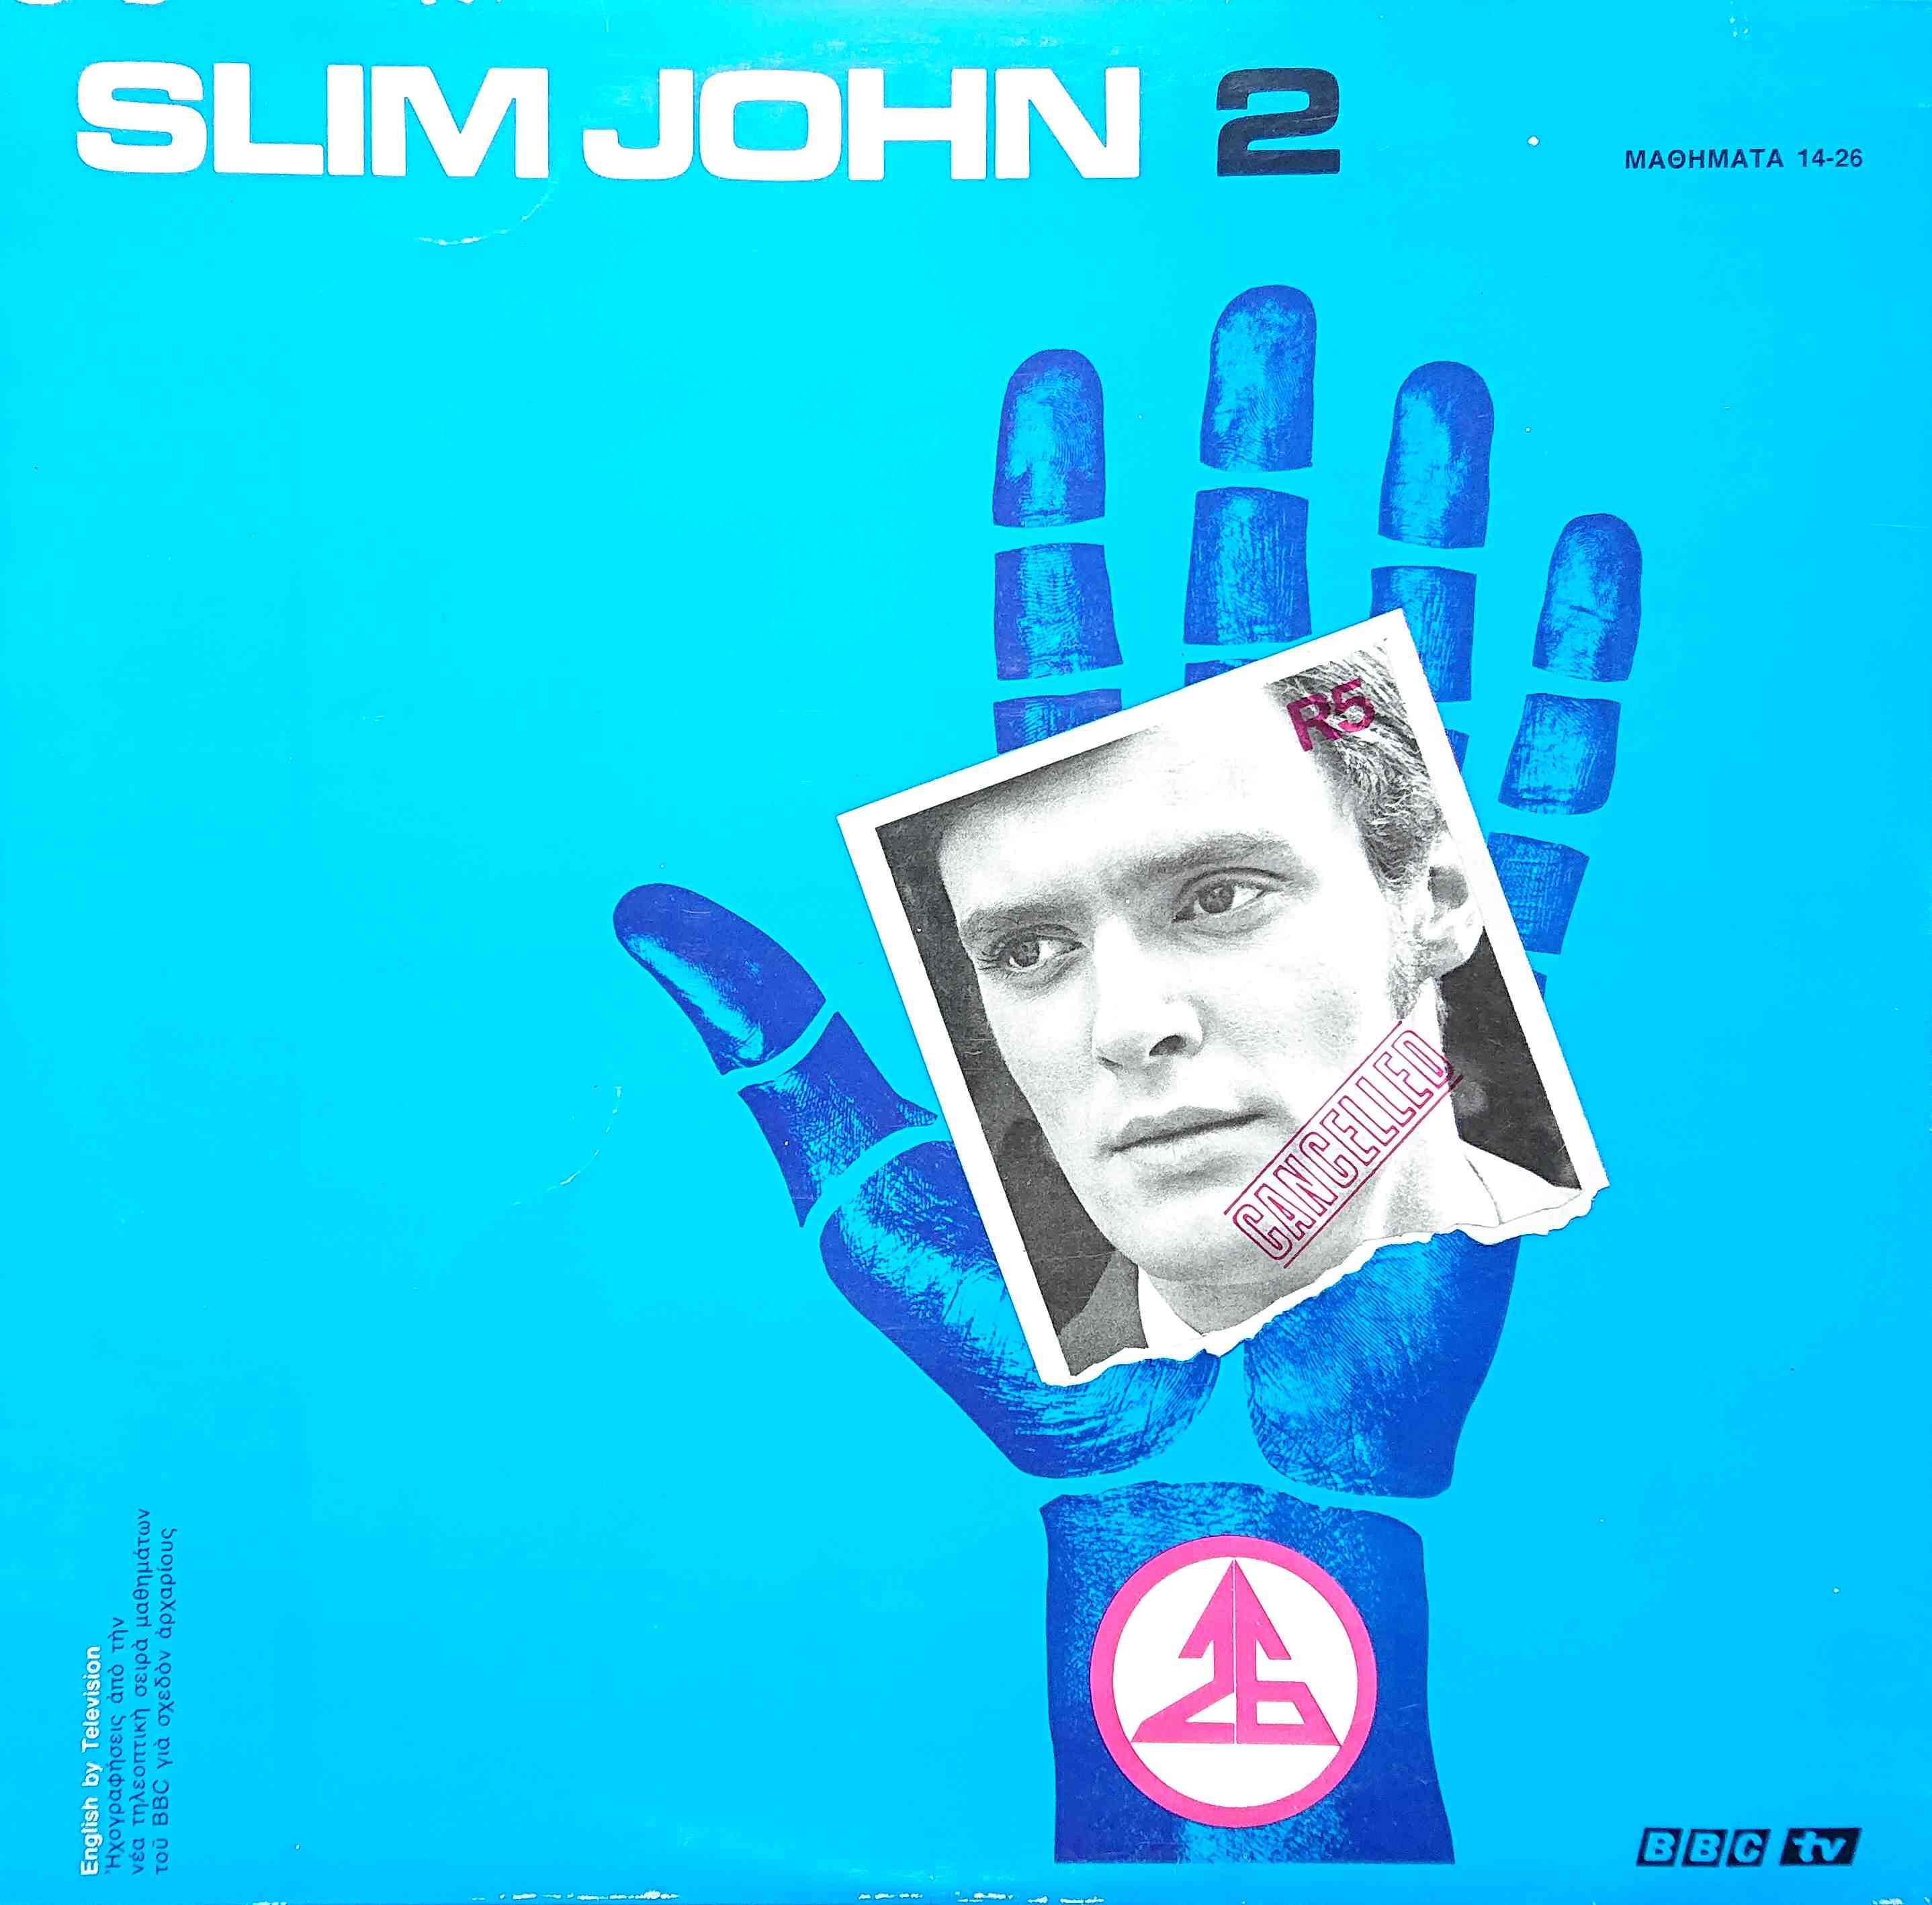 Picture of SJ 2 Slim John 2 by artist Unknown from the BBC records and Tapes library